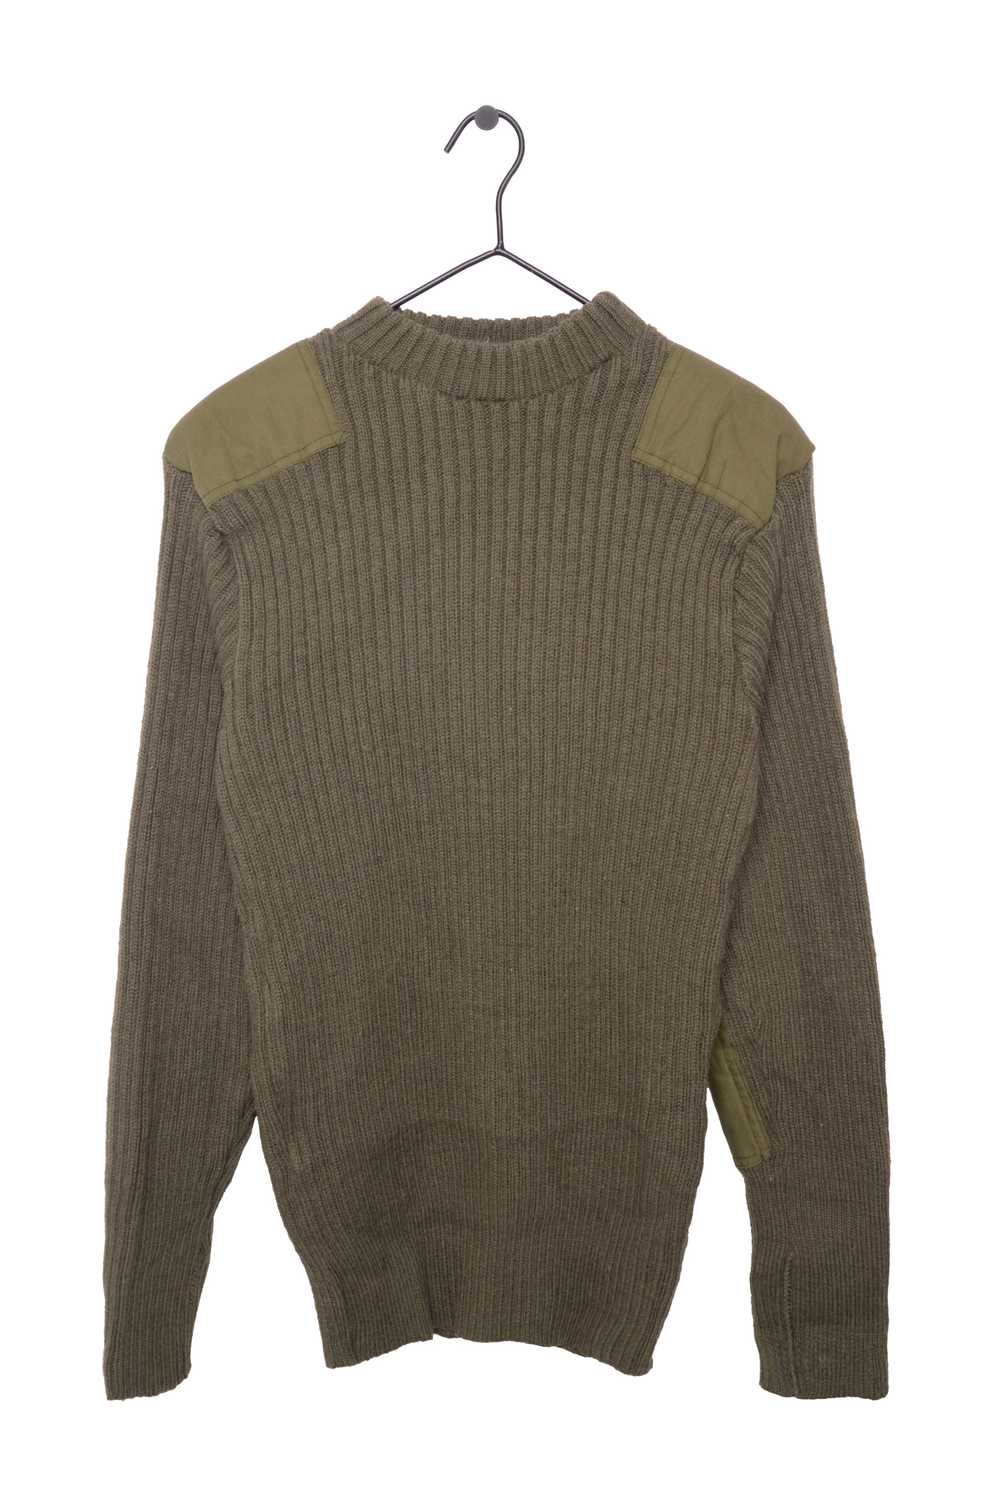 Shoulder Patch Wool Sweater - image 1